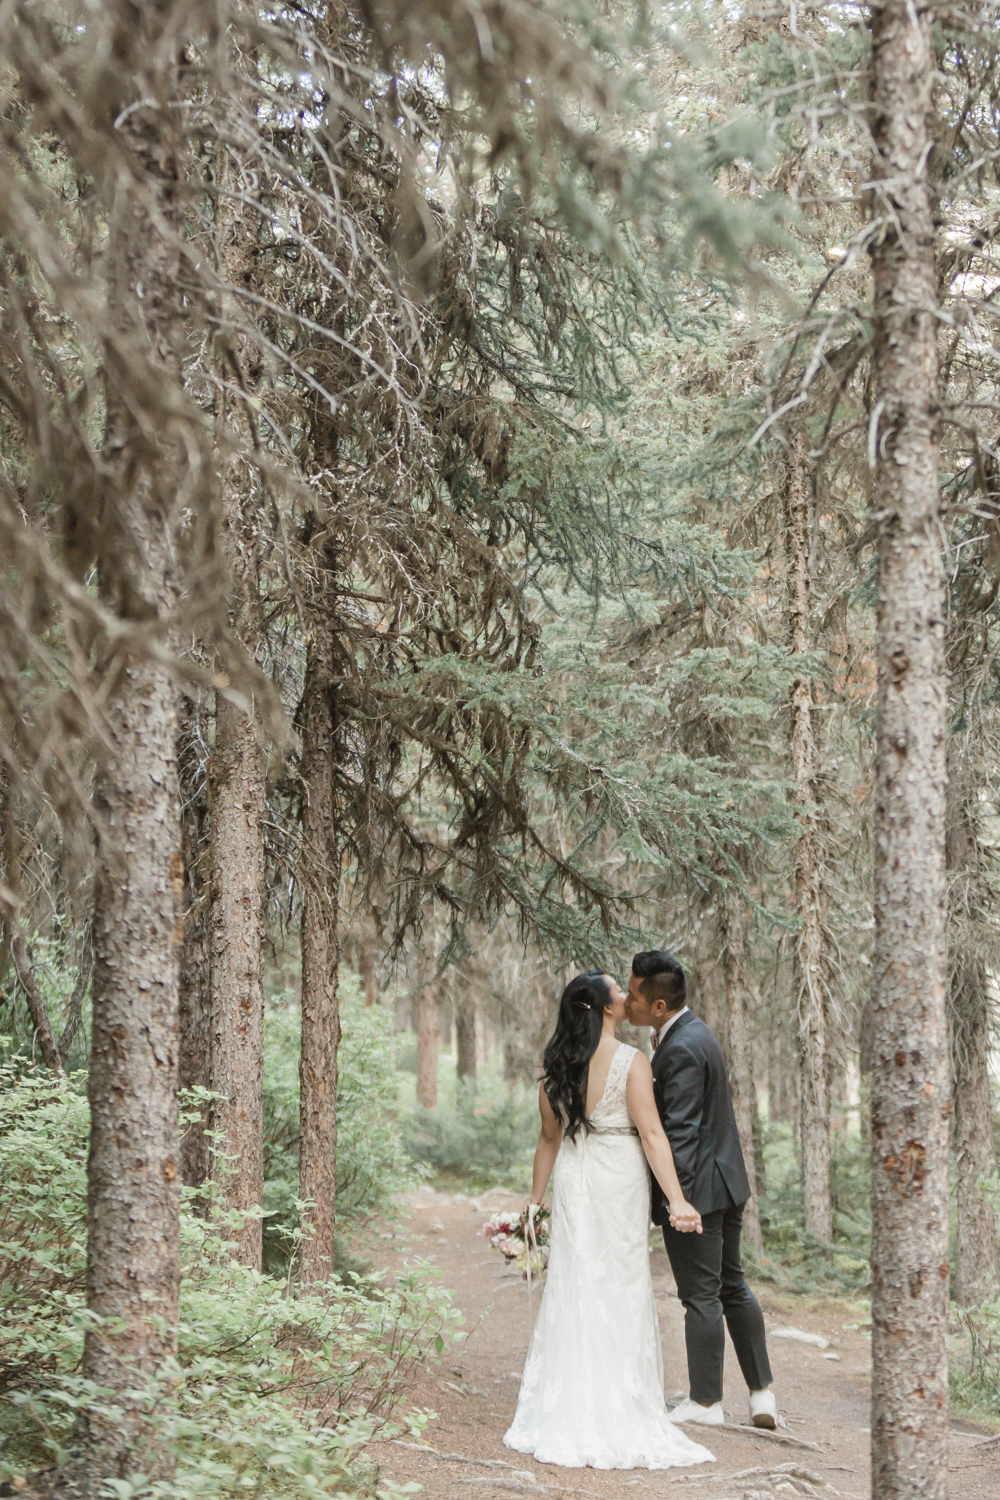 Walking Elopement in Banff National Park in the forest